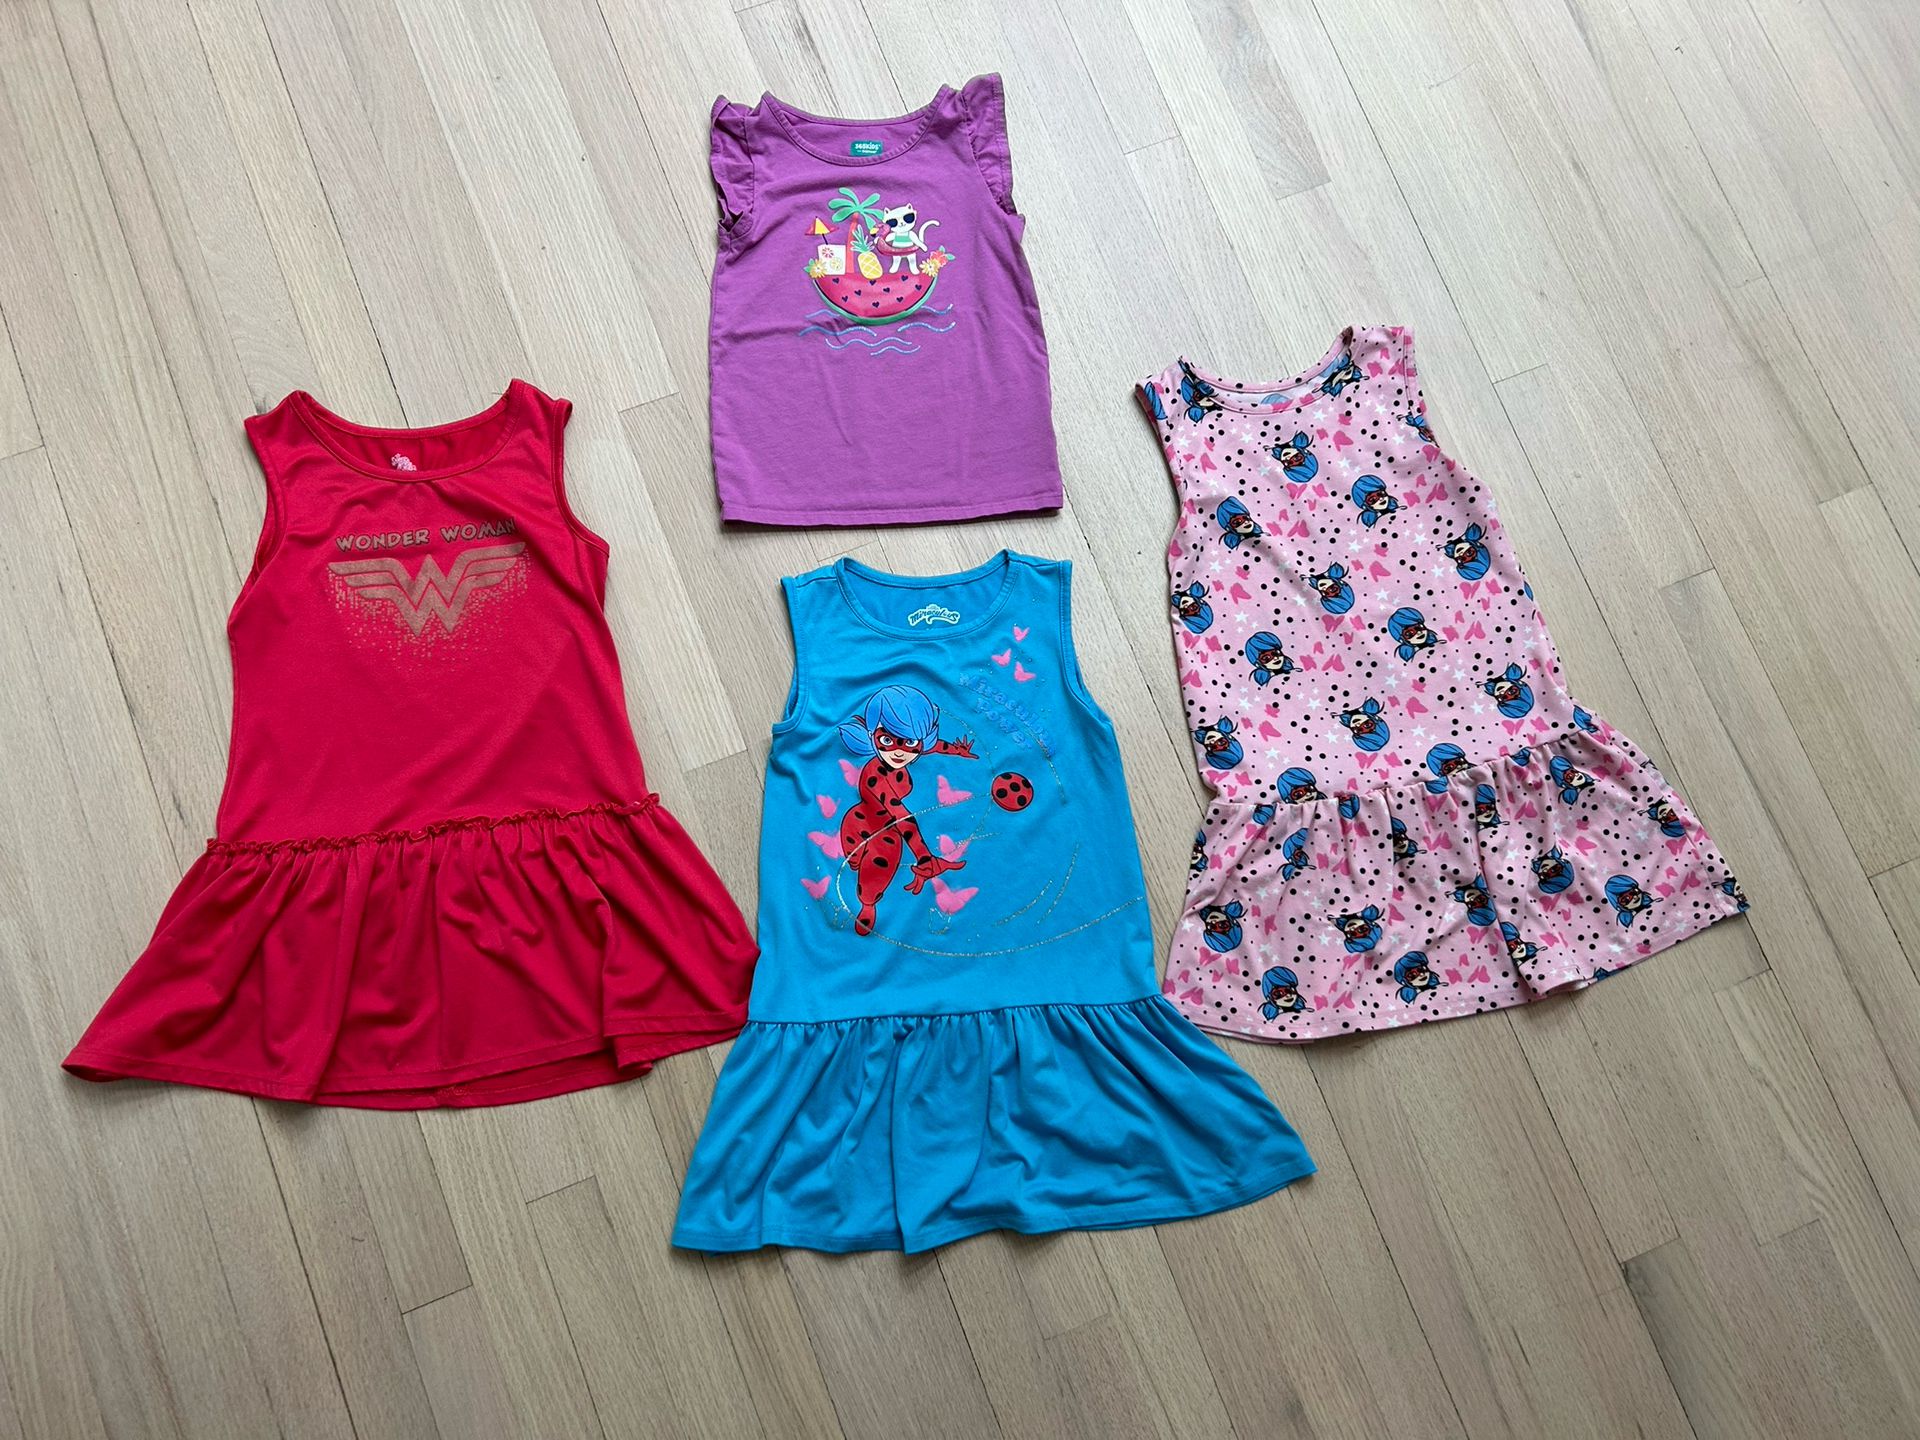 Girls'Summer Clothes Size 6